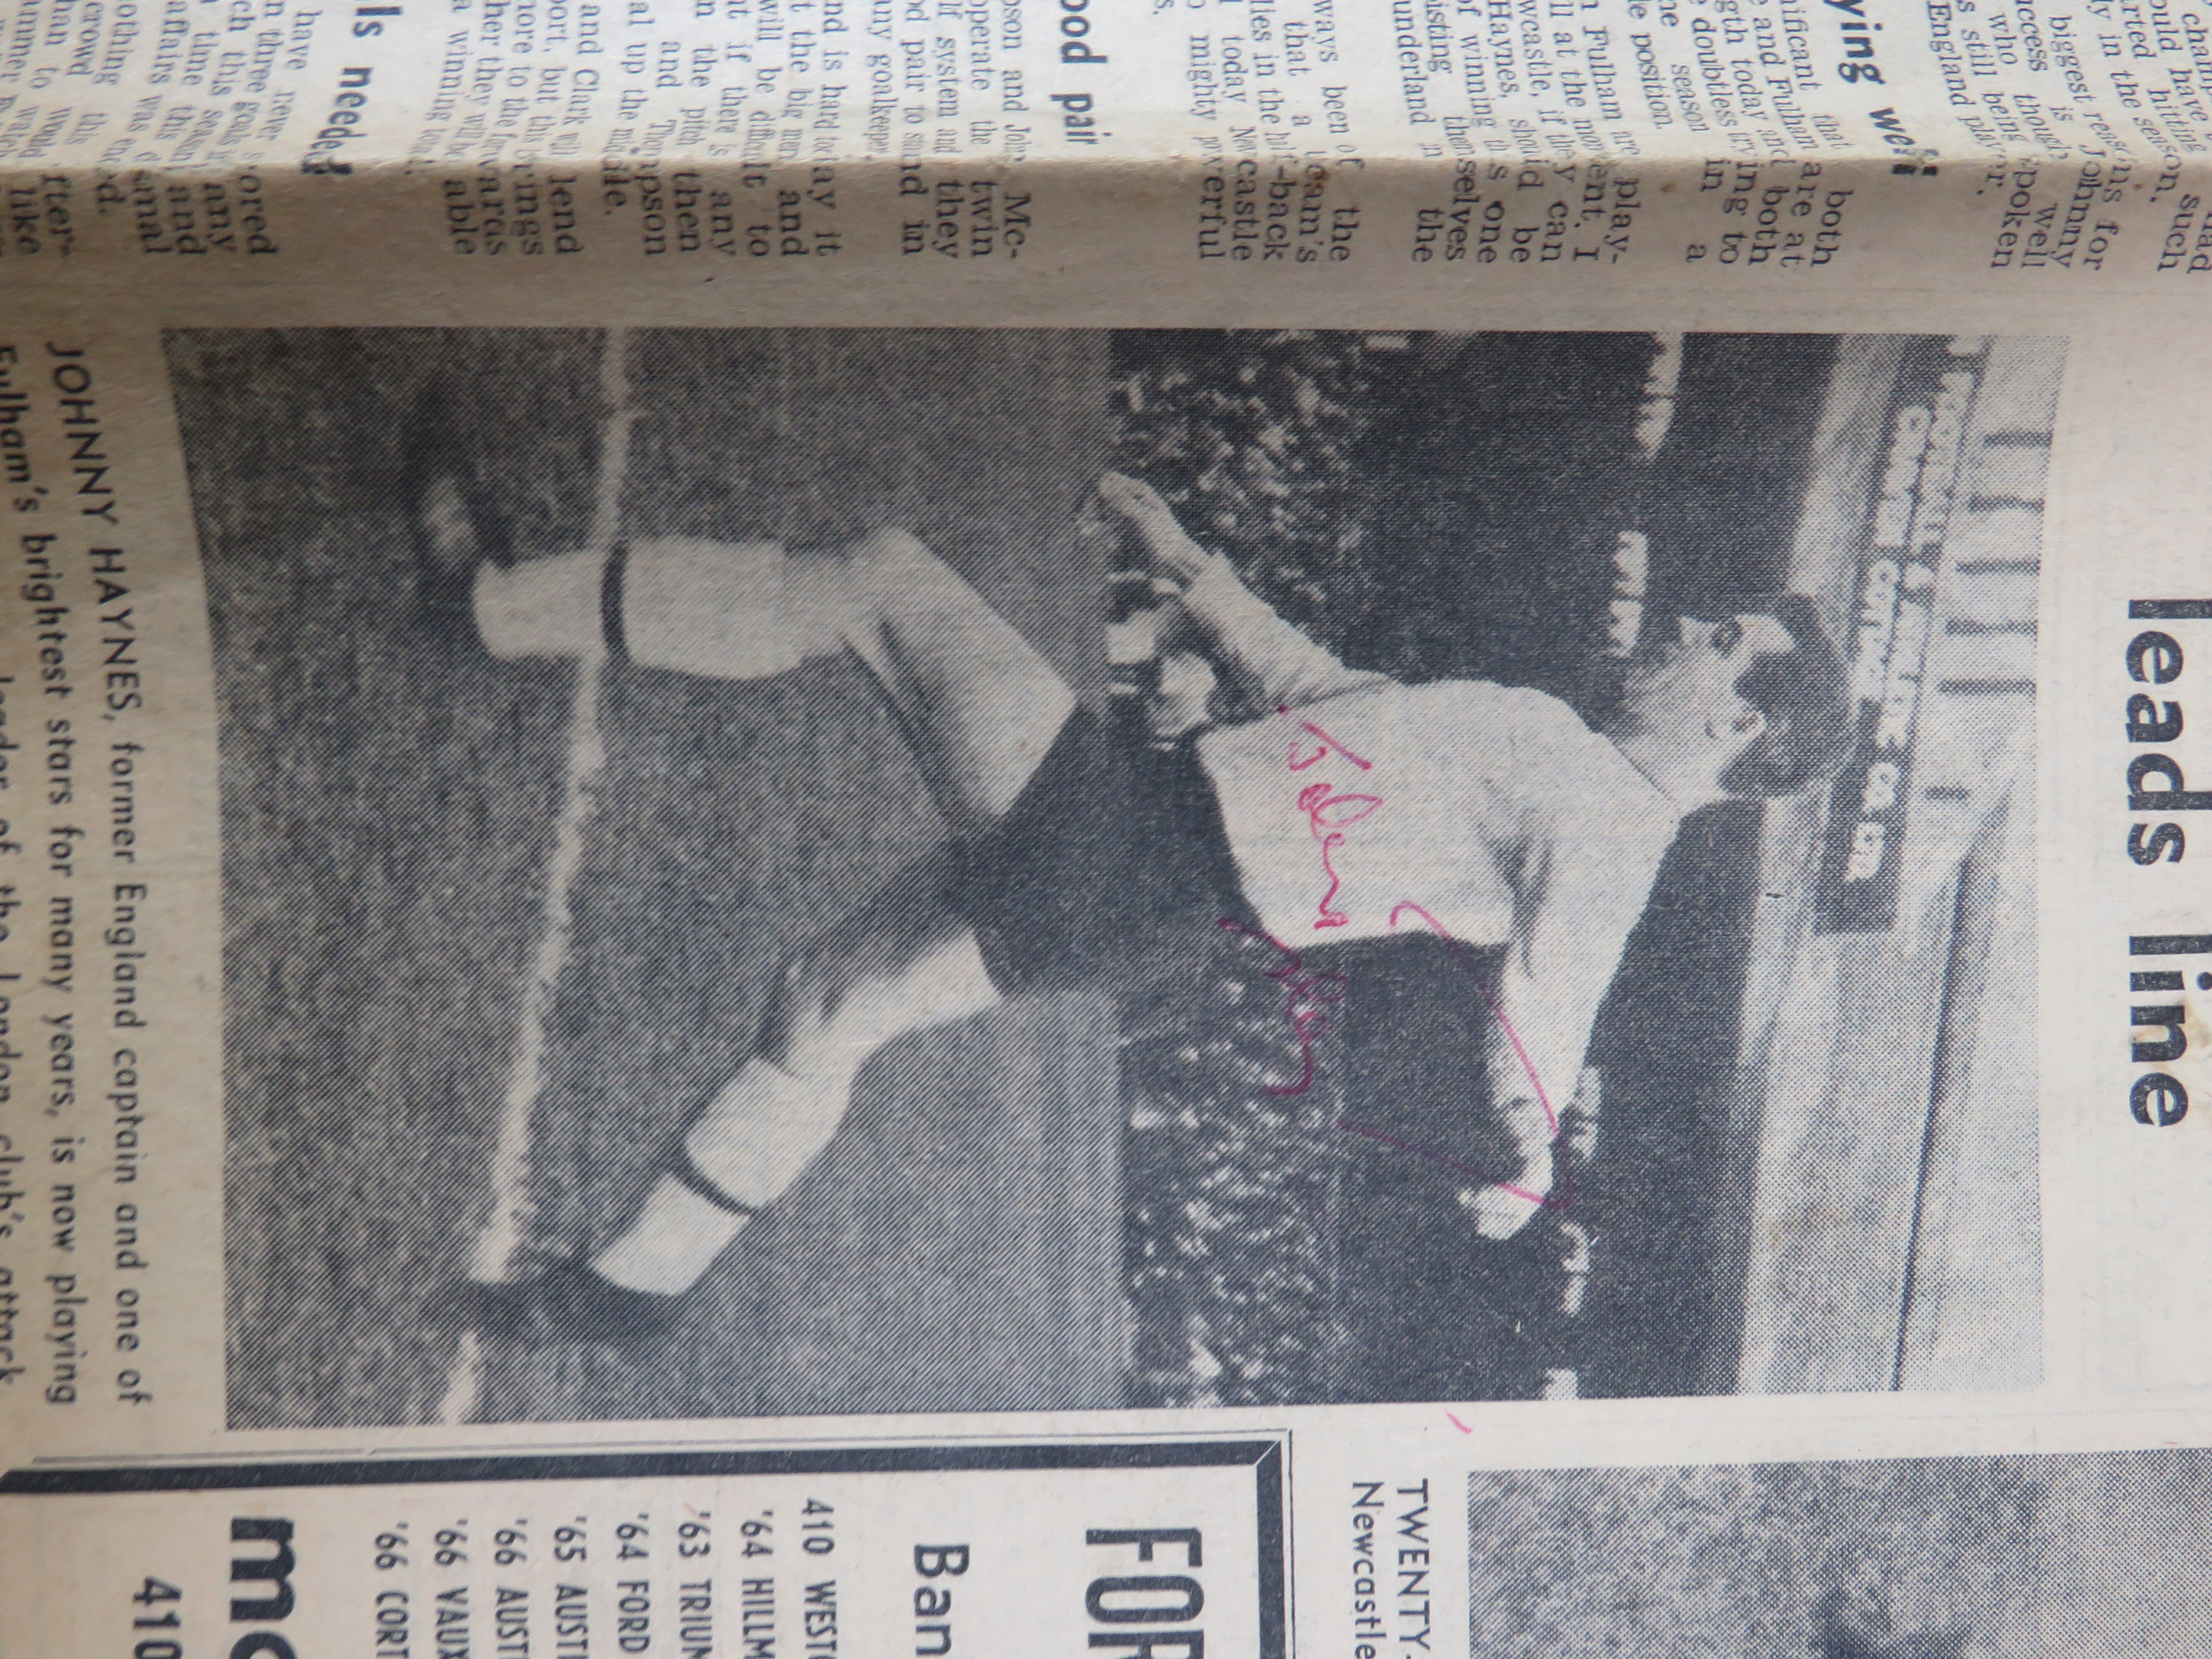 Sporting Magazines dating from 1950's, Newcastle United Match day programme from 1966 plus autograph - Image 5 of 11